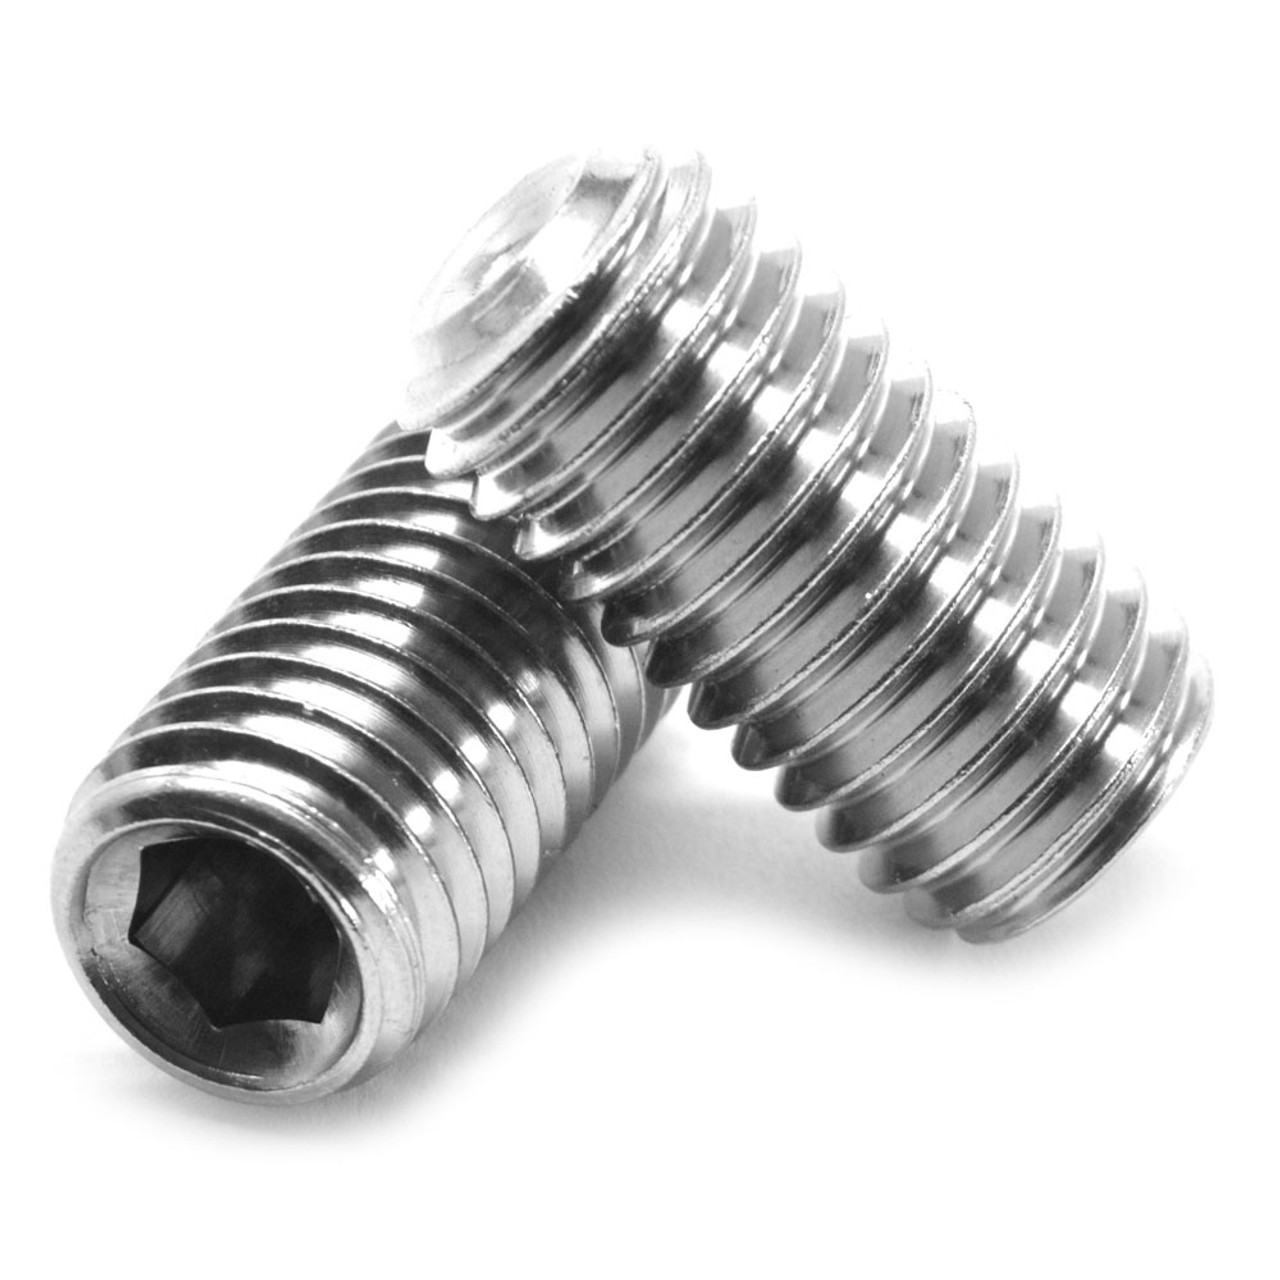 #10-24 x 3/8" Coarse Thread Socket Set Screw Cup Point Stainless Steel 18-8